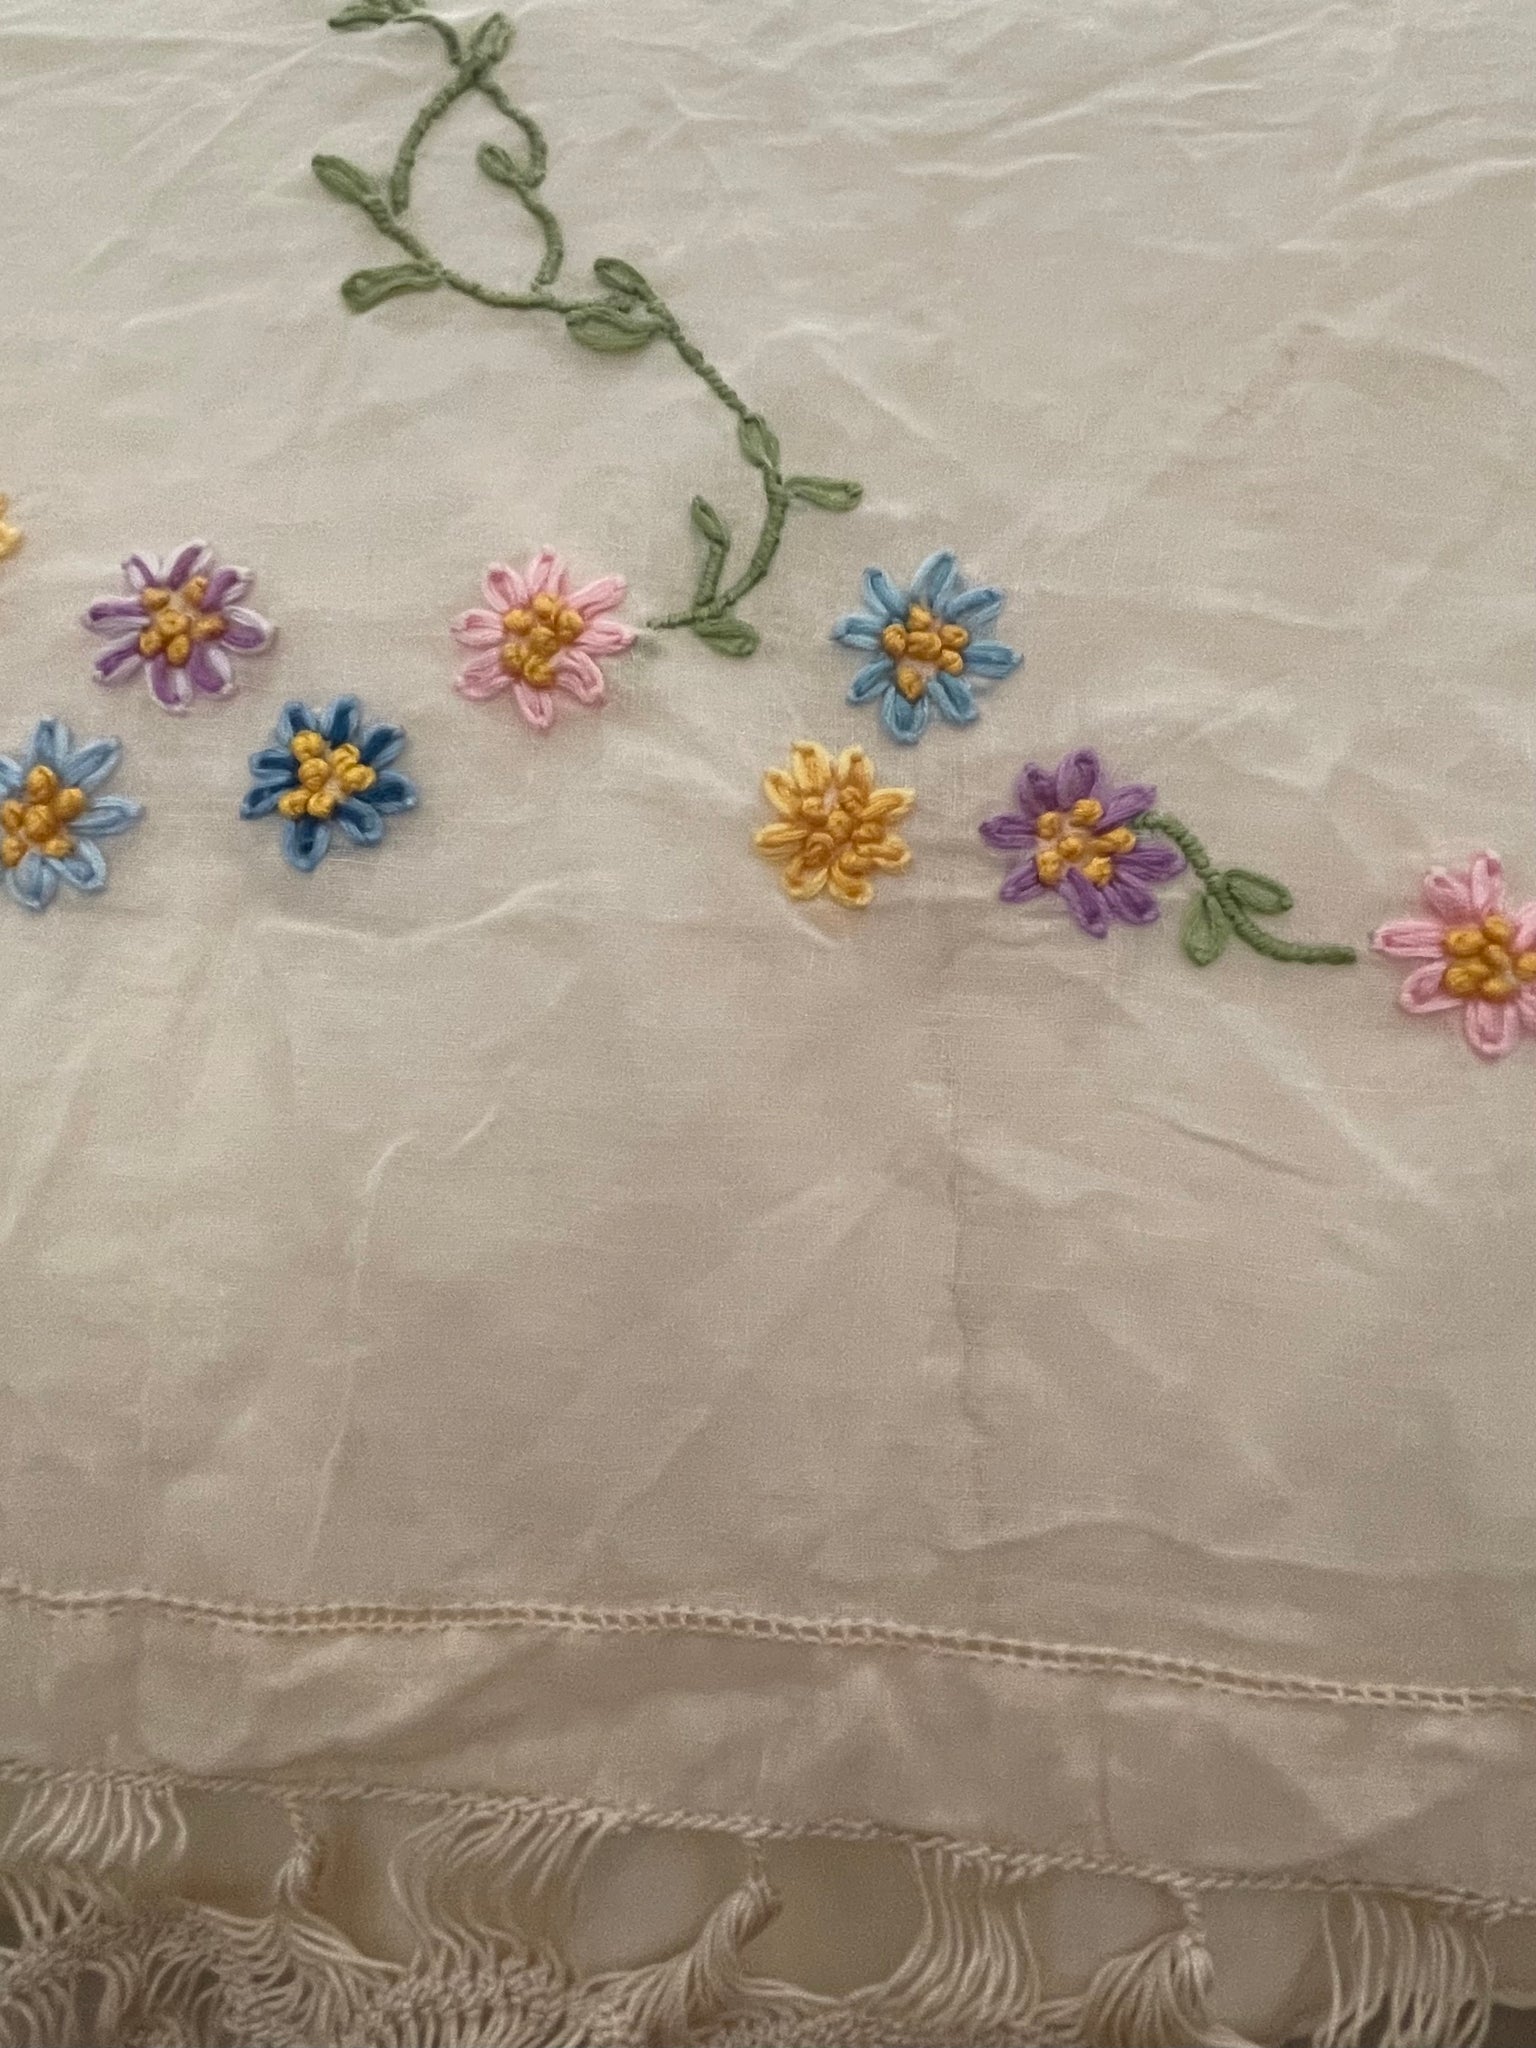 Antique 1900s Embroidered Flower Basket Bed Cover